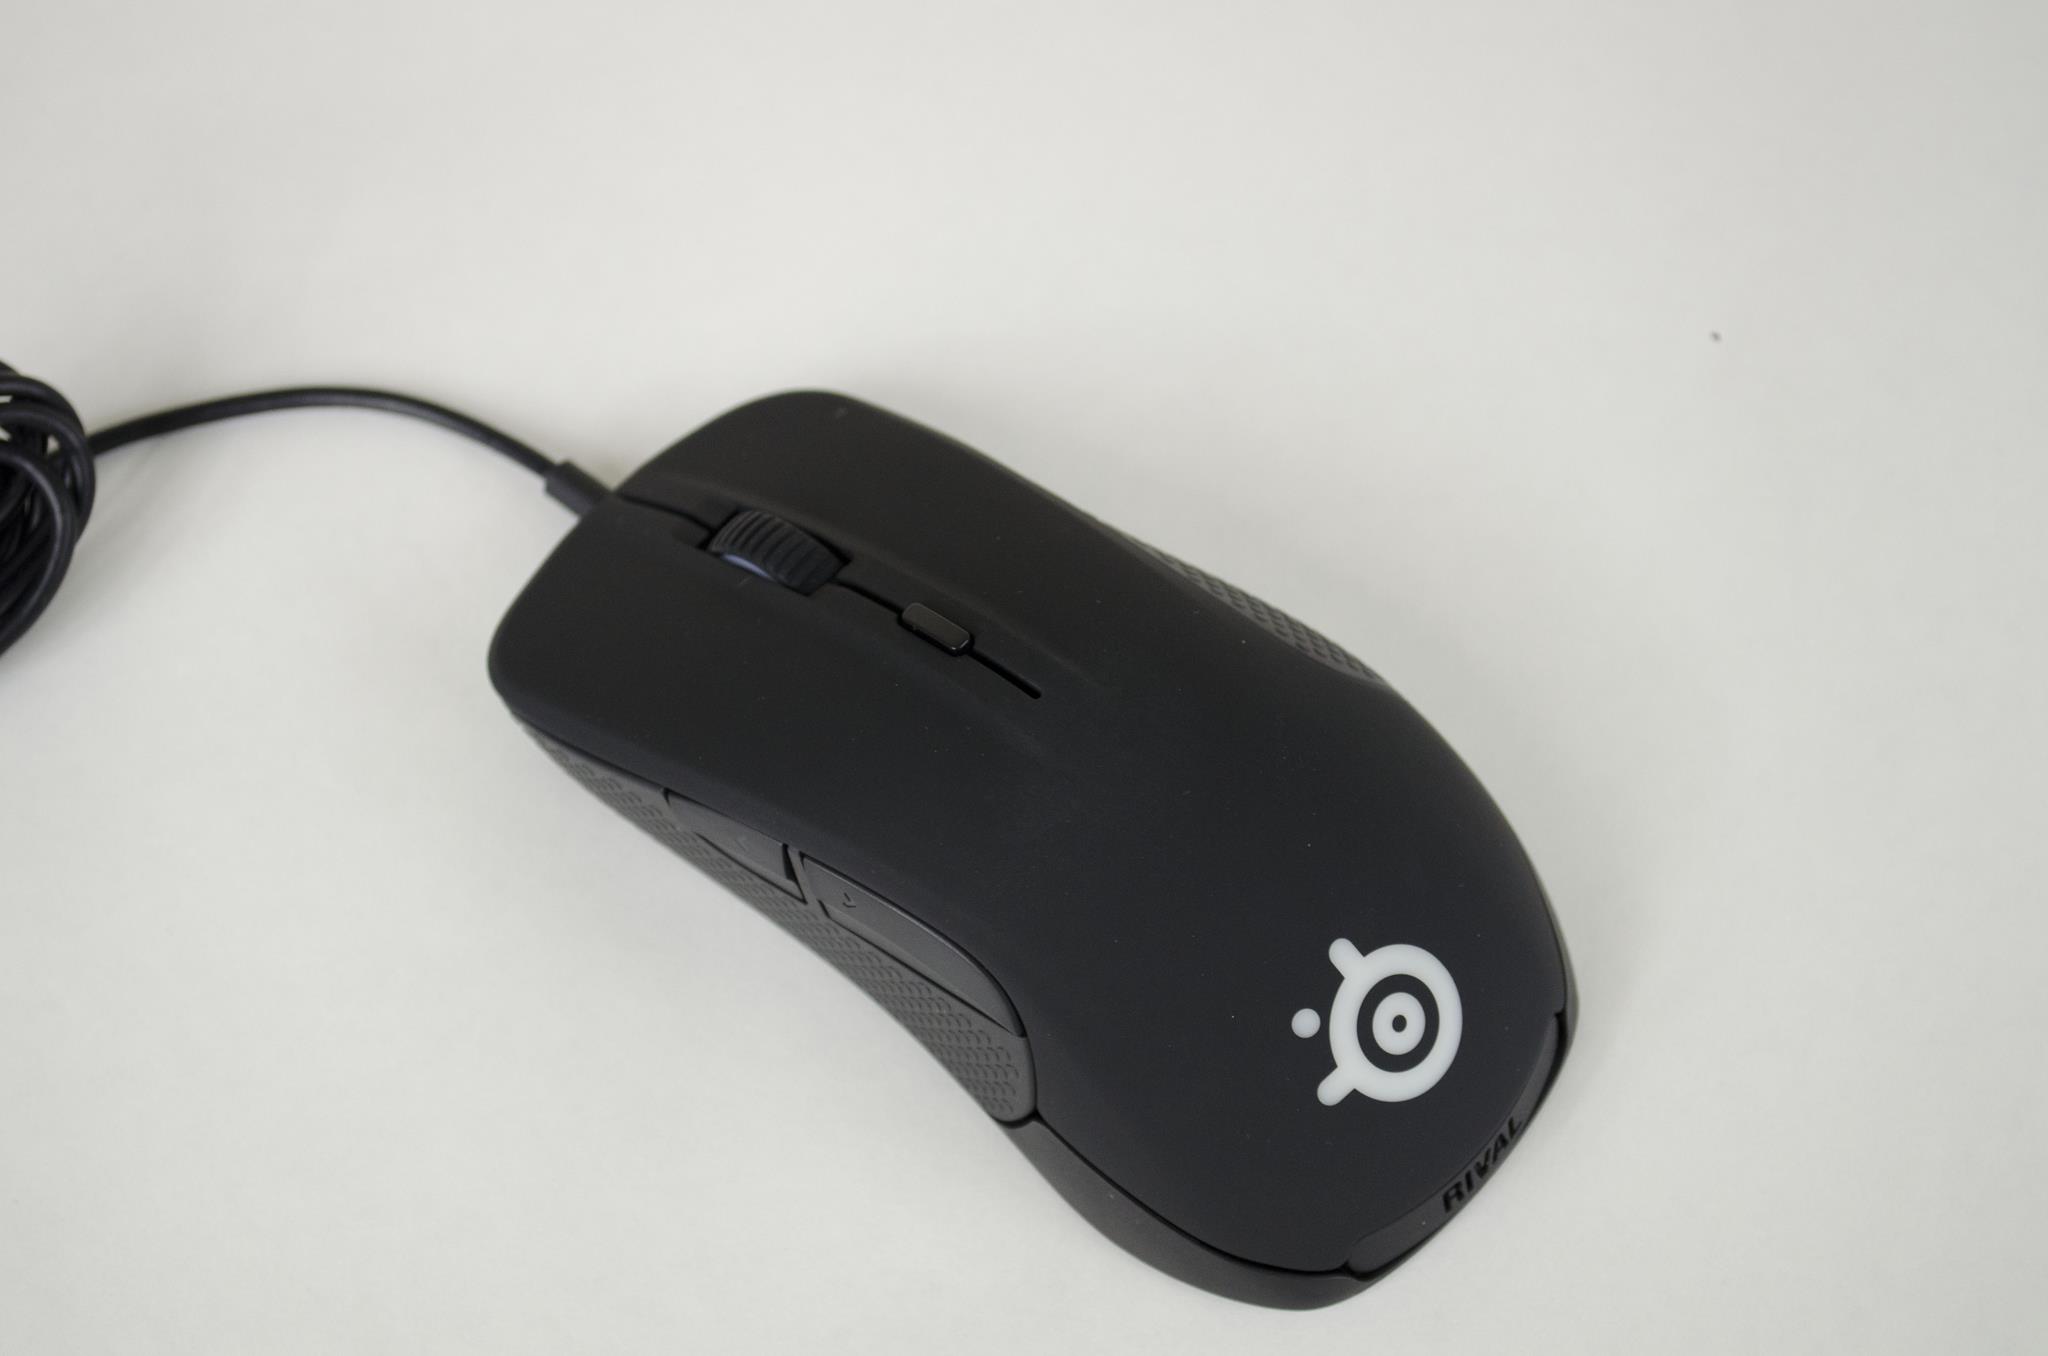 SteelSeries Rival 300 Optical Gaming Mouse Review